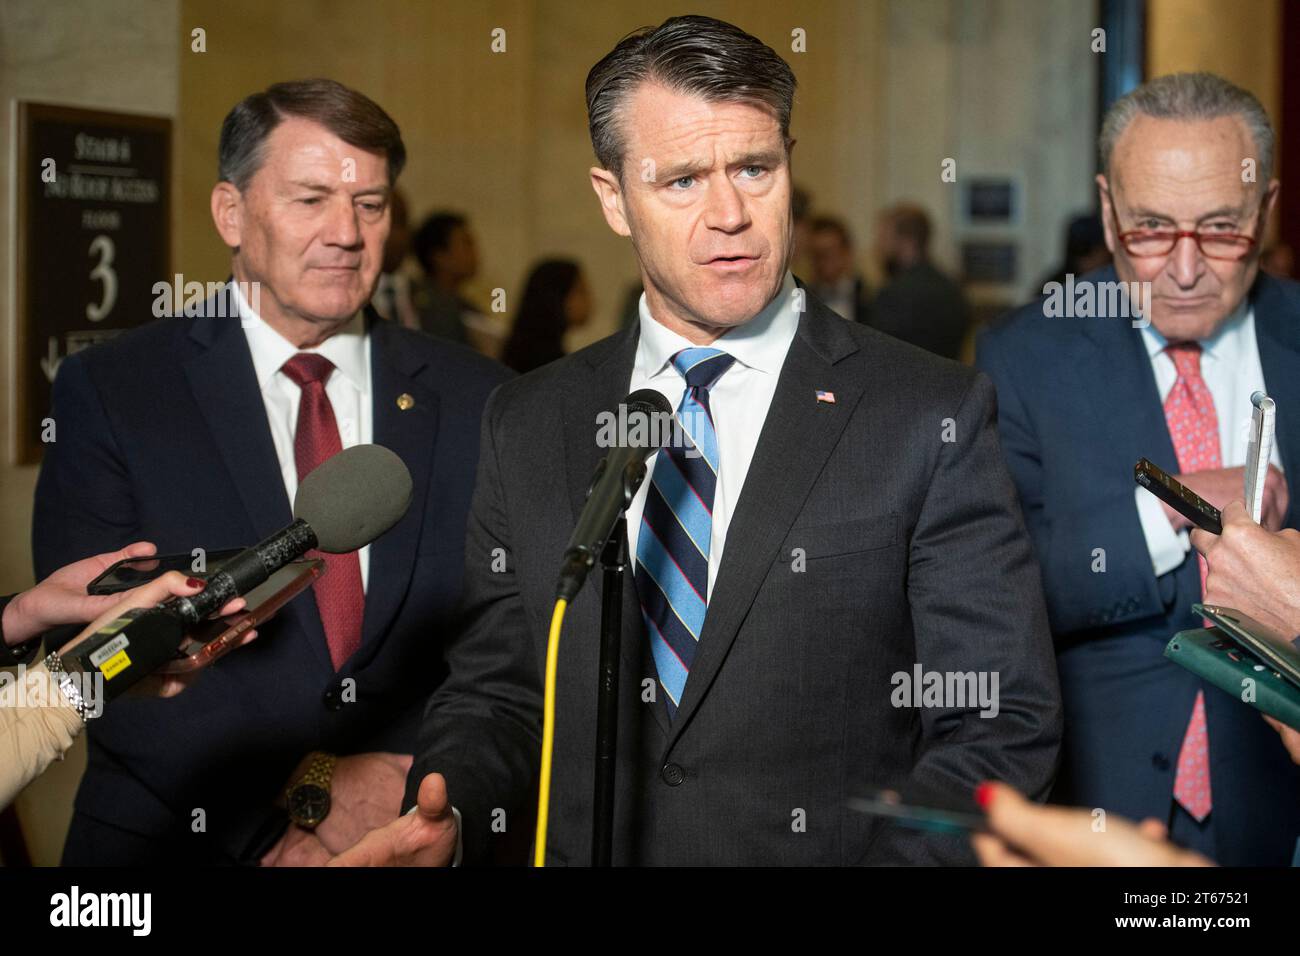 United States Senator Todd Young (Republican of Indiana), center, is joined by United States Senator Mike Rounds (Republican of South Dakota), left, and United States Senate Majority Leader Chuck Schumer (Democrat of New York), right, for a press briefing in between panels of the Senate bipartisan AI Insight Forums in the Russell Senate Office Building in Washington, DC, USA, Wednesday, November 8, 2023. The AI Insight Forums seek to bring together AI stakeholders to supercharge the Congressional process to develop bipartisan artificial intelligence legislation. The Forums have focused on capi Stock Photo